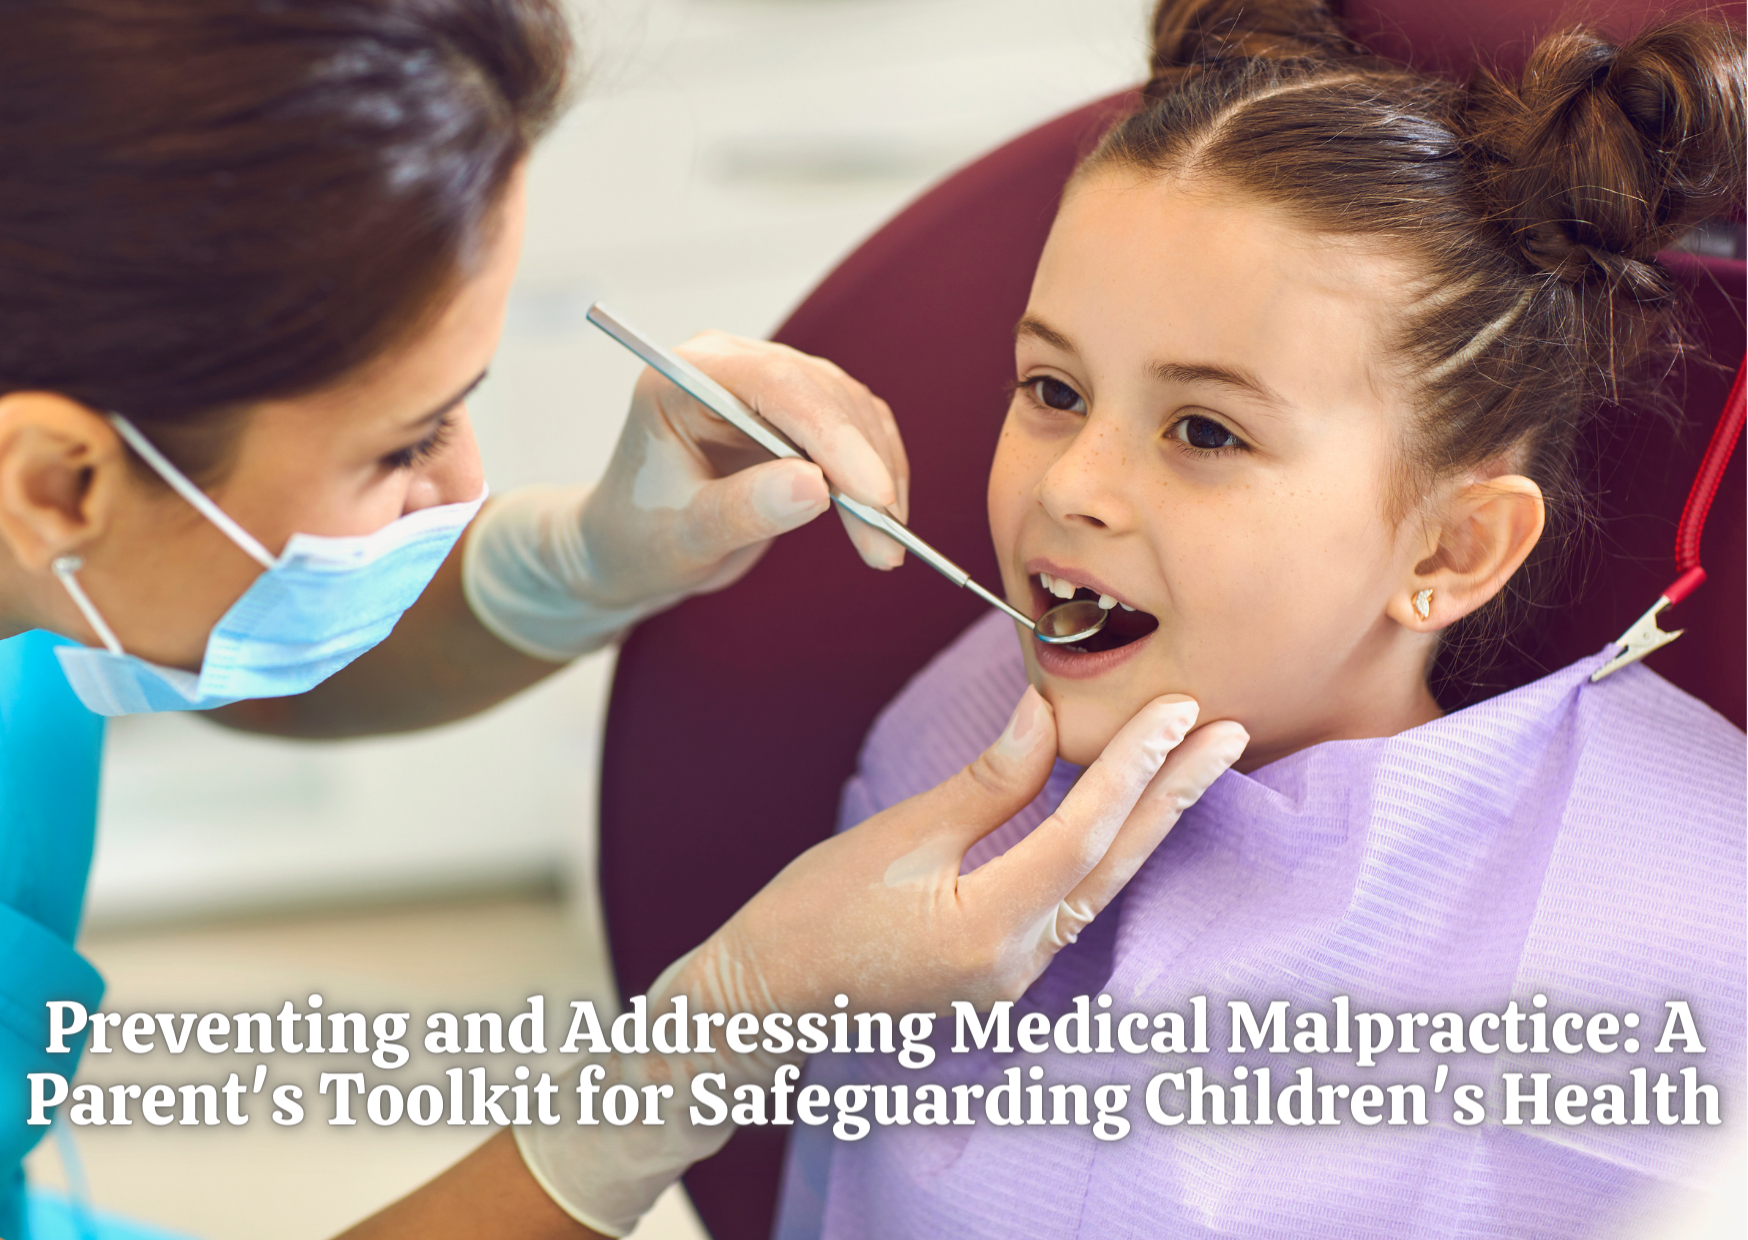 Preventing and Addressing Medical Malpractice: A Parent's Toolkit for Safeguarding Children's Health